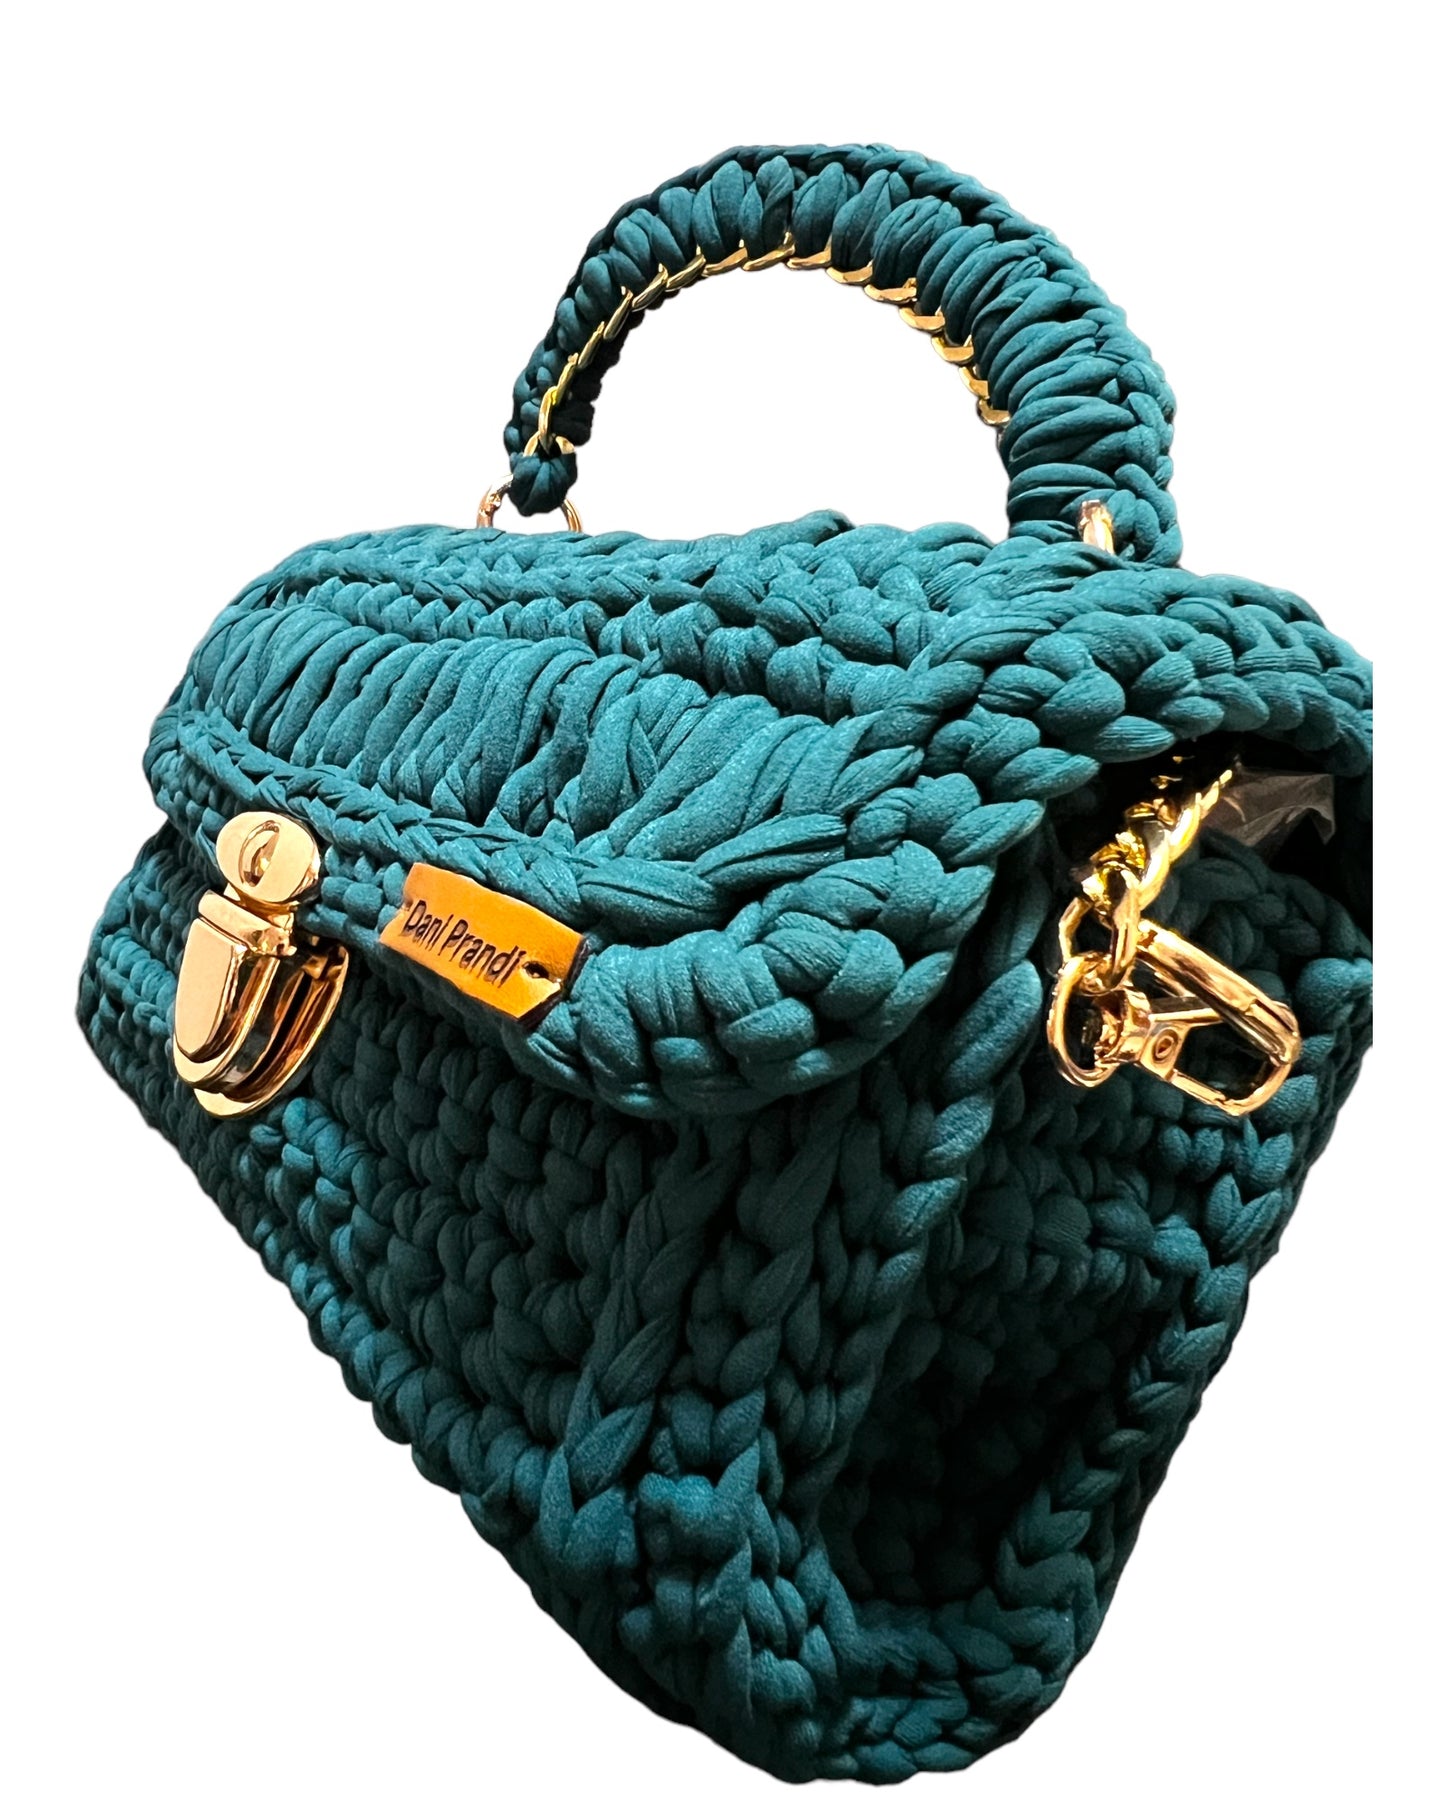 dark green luxury crochet bag with an exquisite design and a golden removable shoulder chain. The bag is a masterpiece of elegant craftsmanship, featuring meticulous crochet work that reflects a refined and sophisticated model. The versatile golden chain adds a touch of glamour, allowing for multiple styling options.